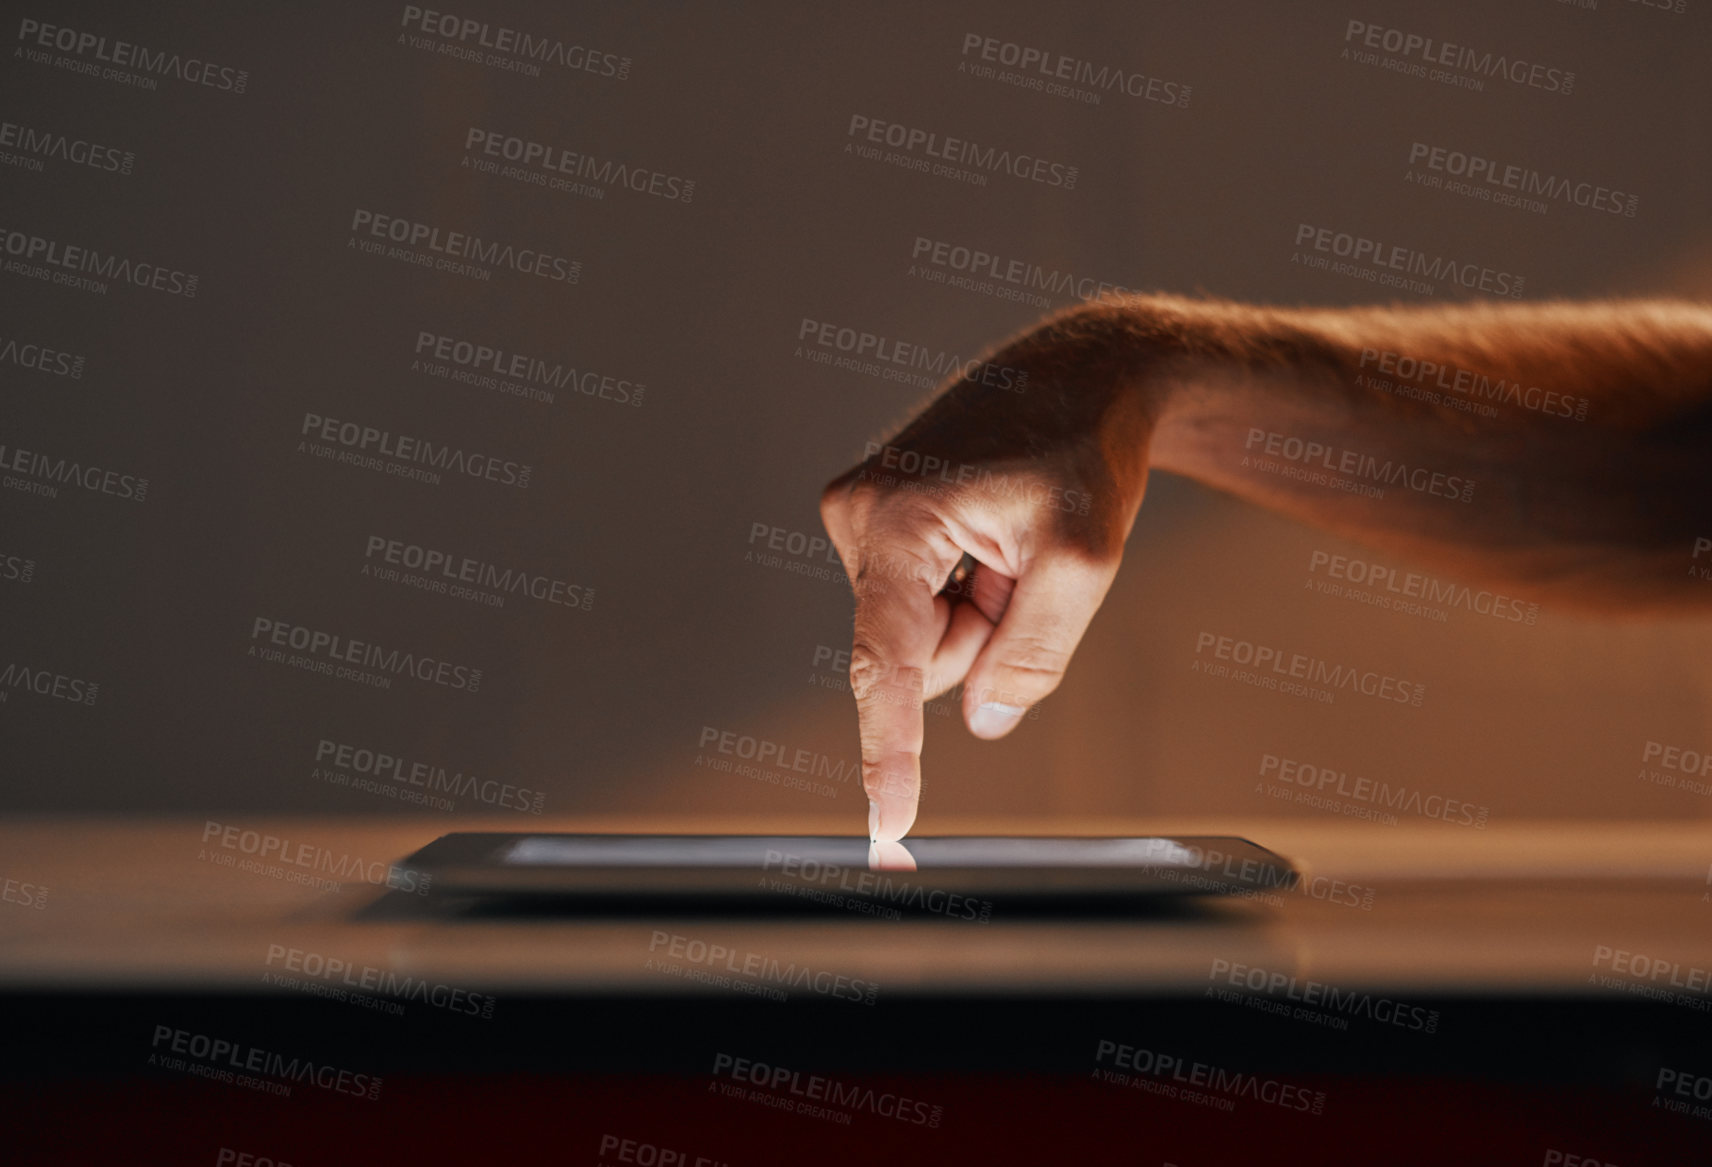 Buy stock photo Cropped shot of an unrecognizable person using a digital tablet